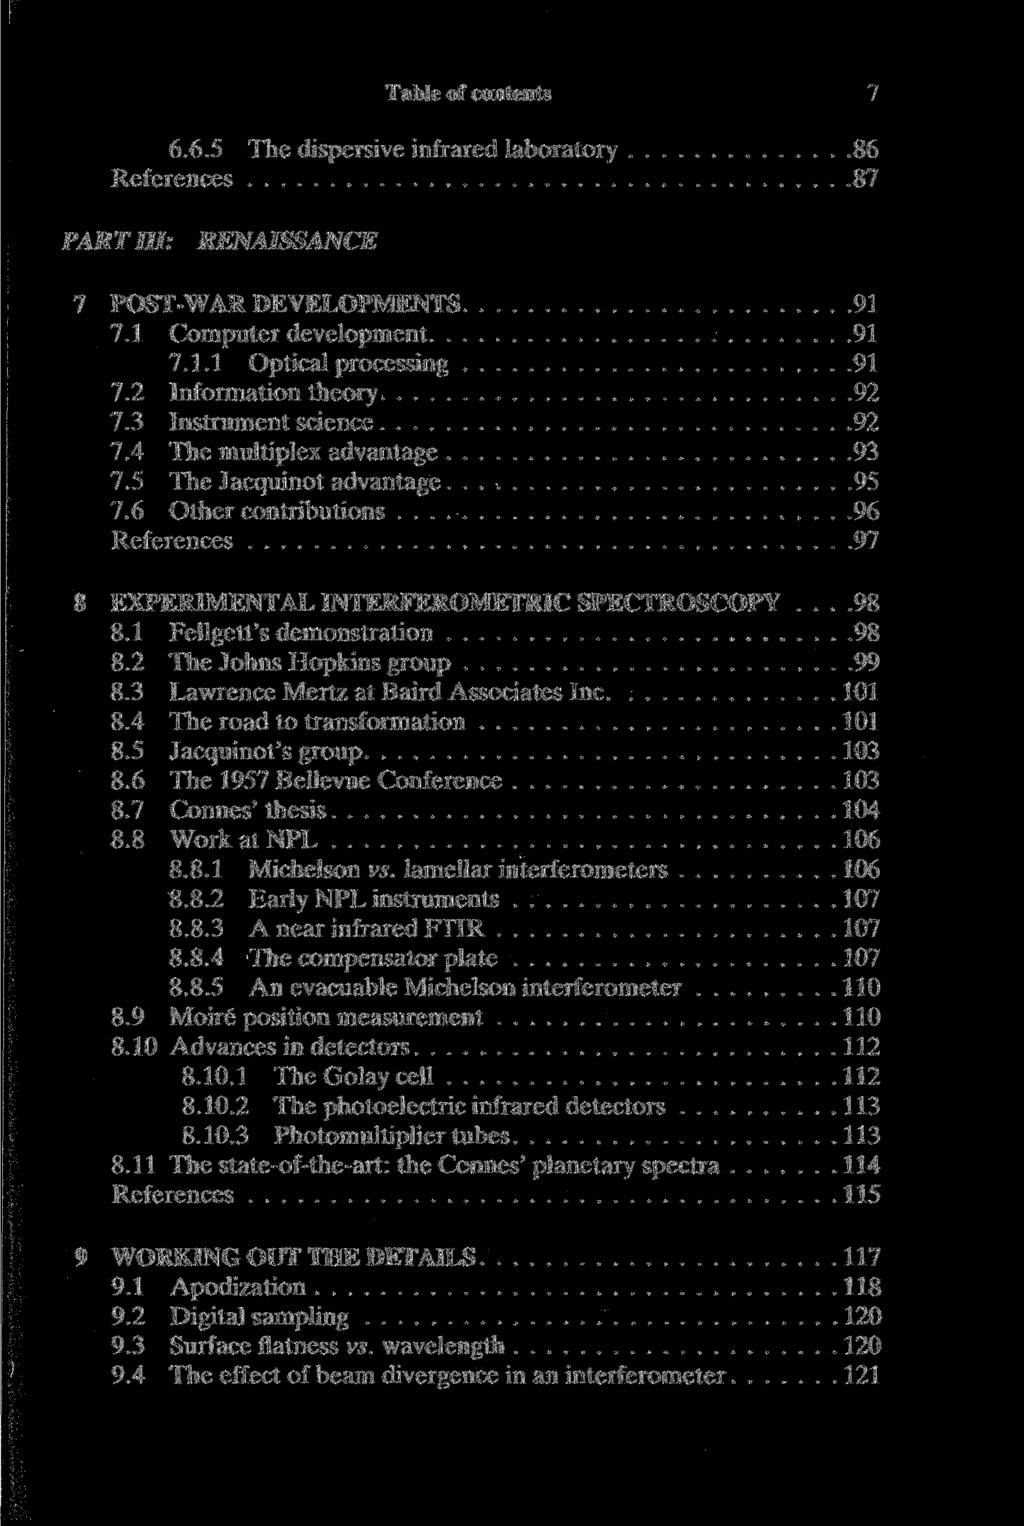 Table of contents 7 6.6.5 The dispersive infrared laboratory 86 References 87 PART III: RENAISSANCE 7 POST-WAR DEVELOPMENTS 91 7.1 Computer development 91 7.1.1 Optical processing 91 7.